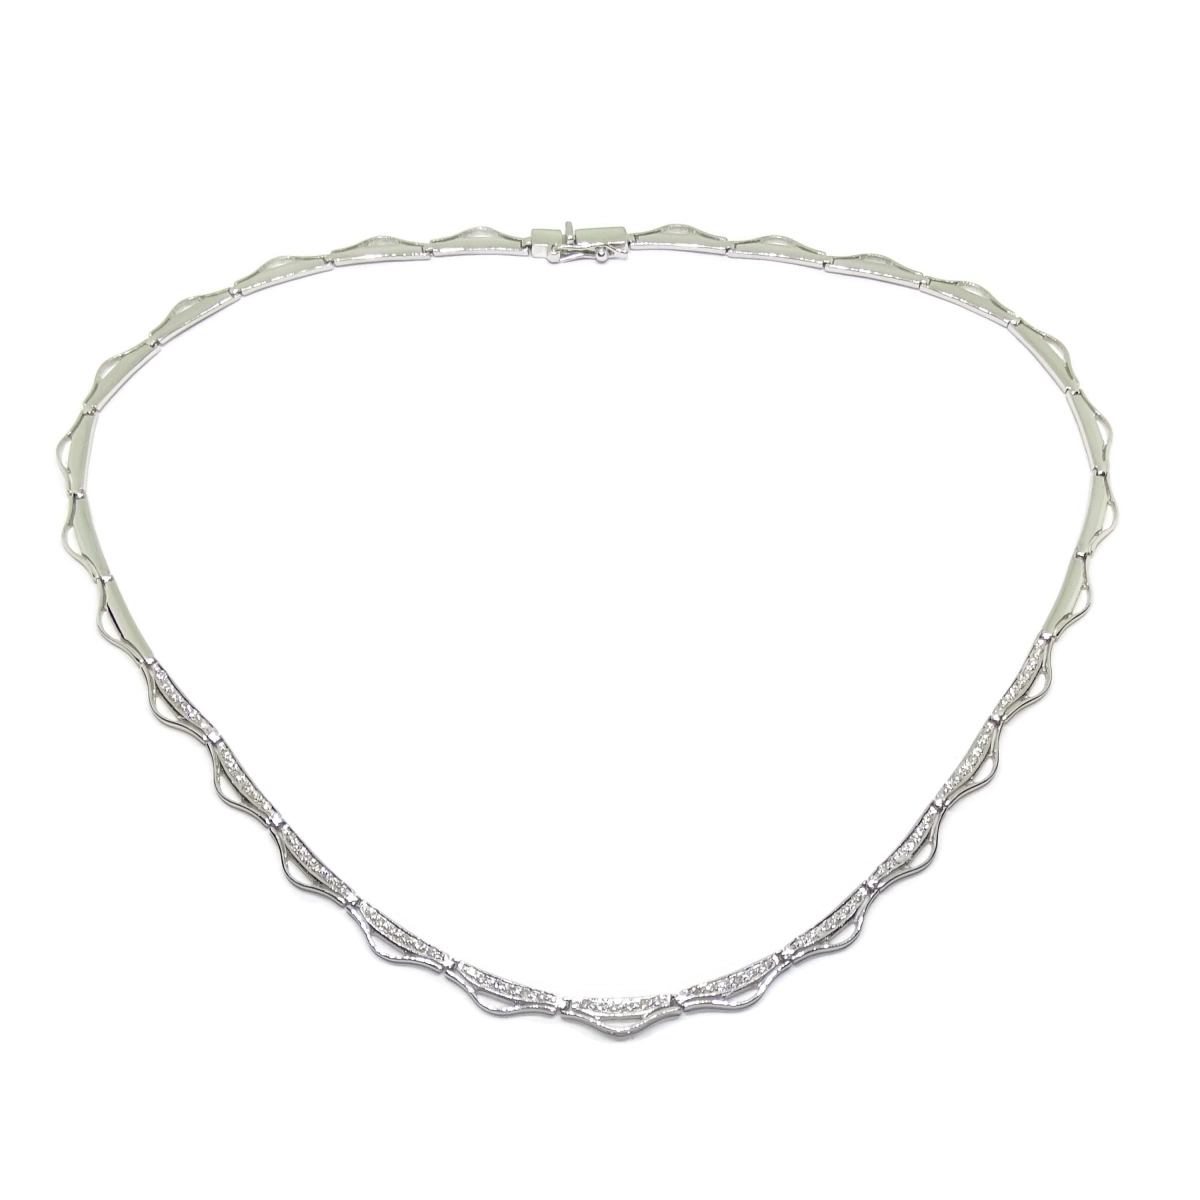 STUNNING CHOKER NECKLACE SEMI-R�GIDA IN 18K WHITE GOLD AND 0.61 CTS OF DIAMONDS TUE�ATLANTIC. NEVER SAY NEVER